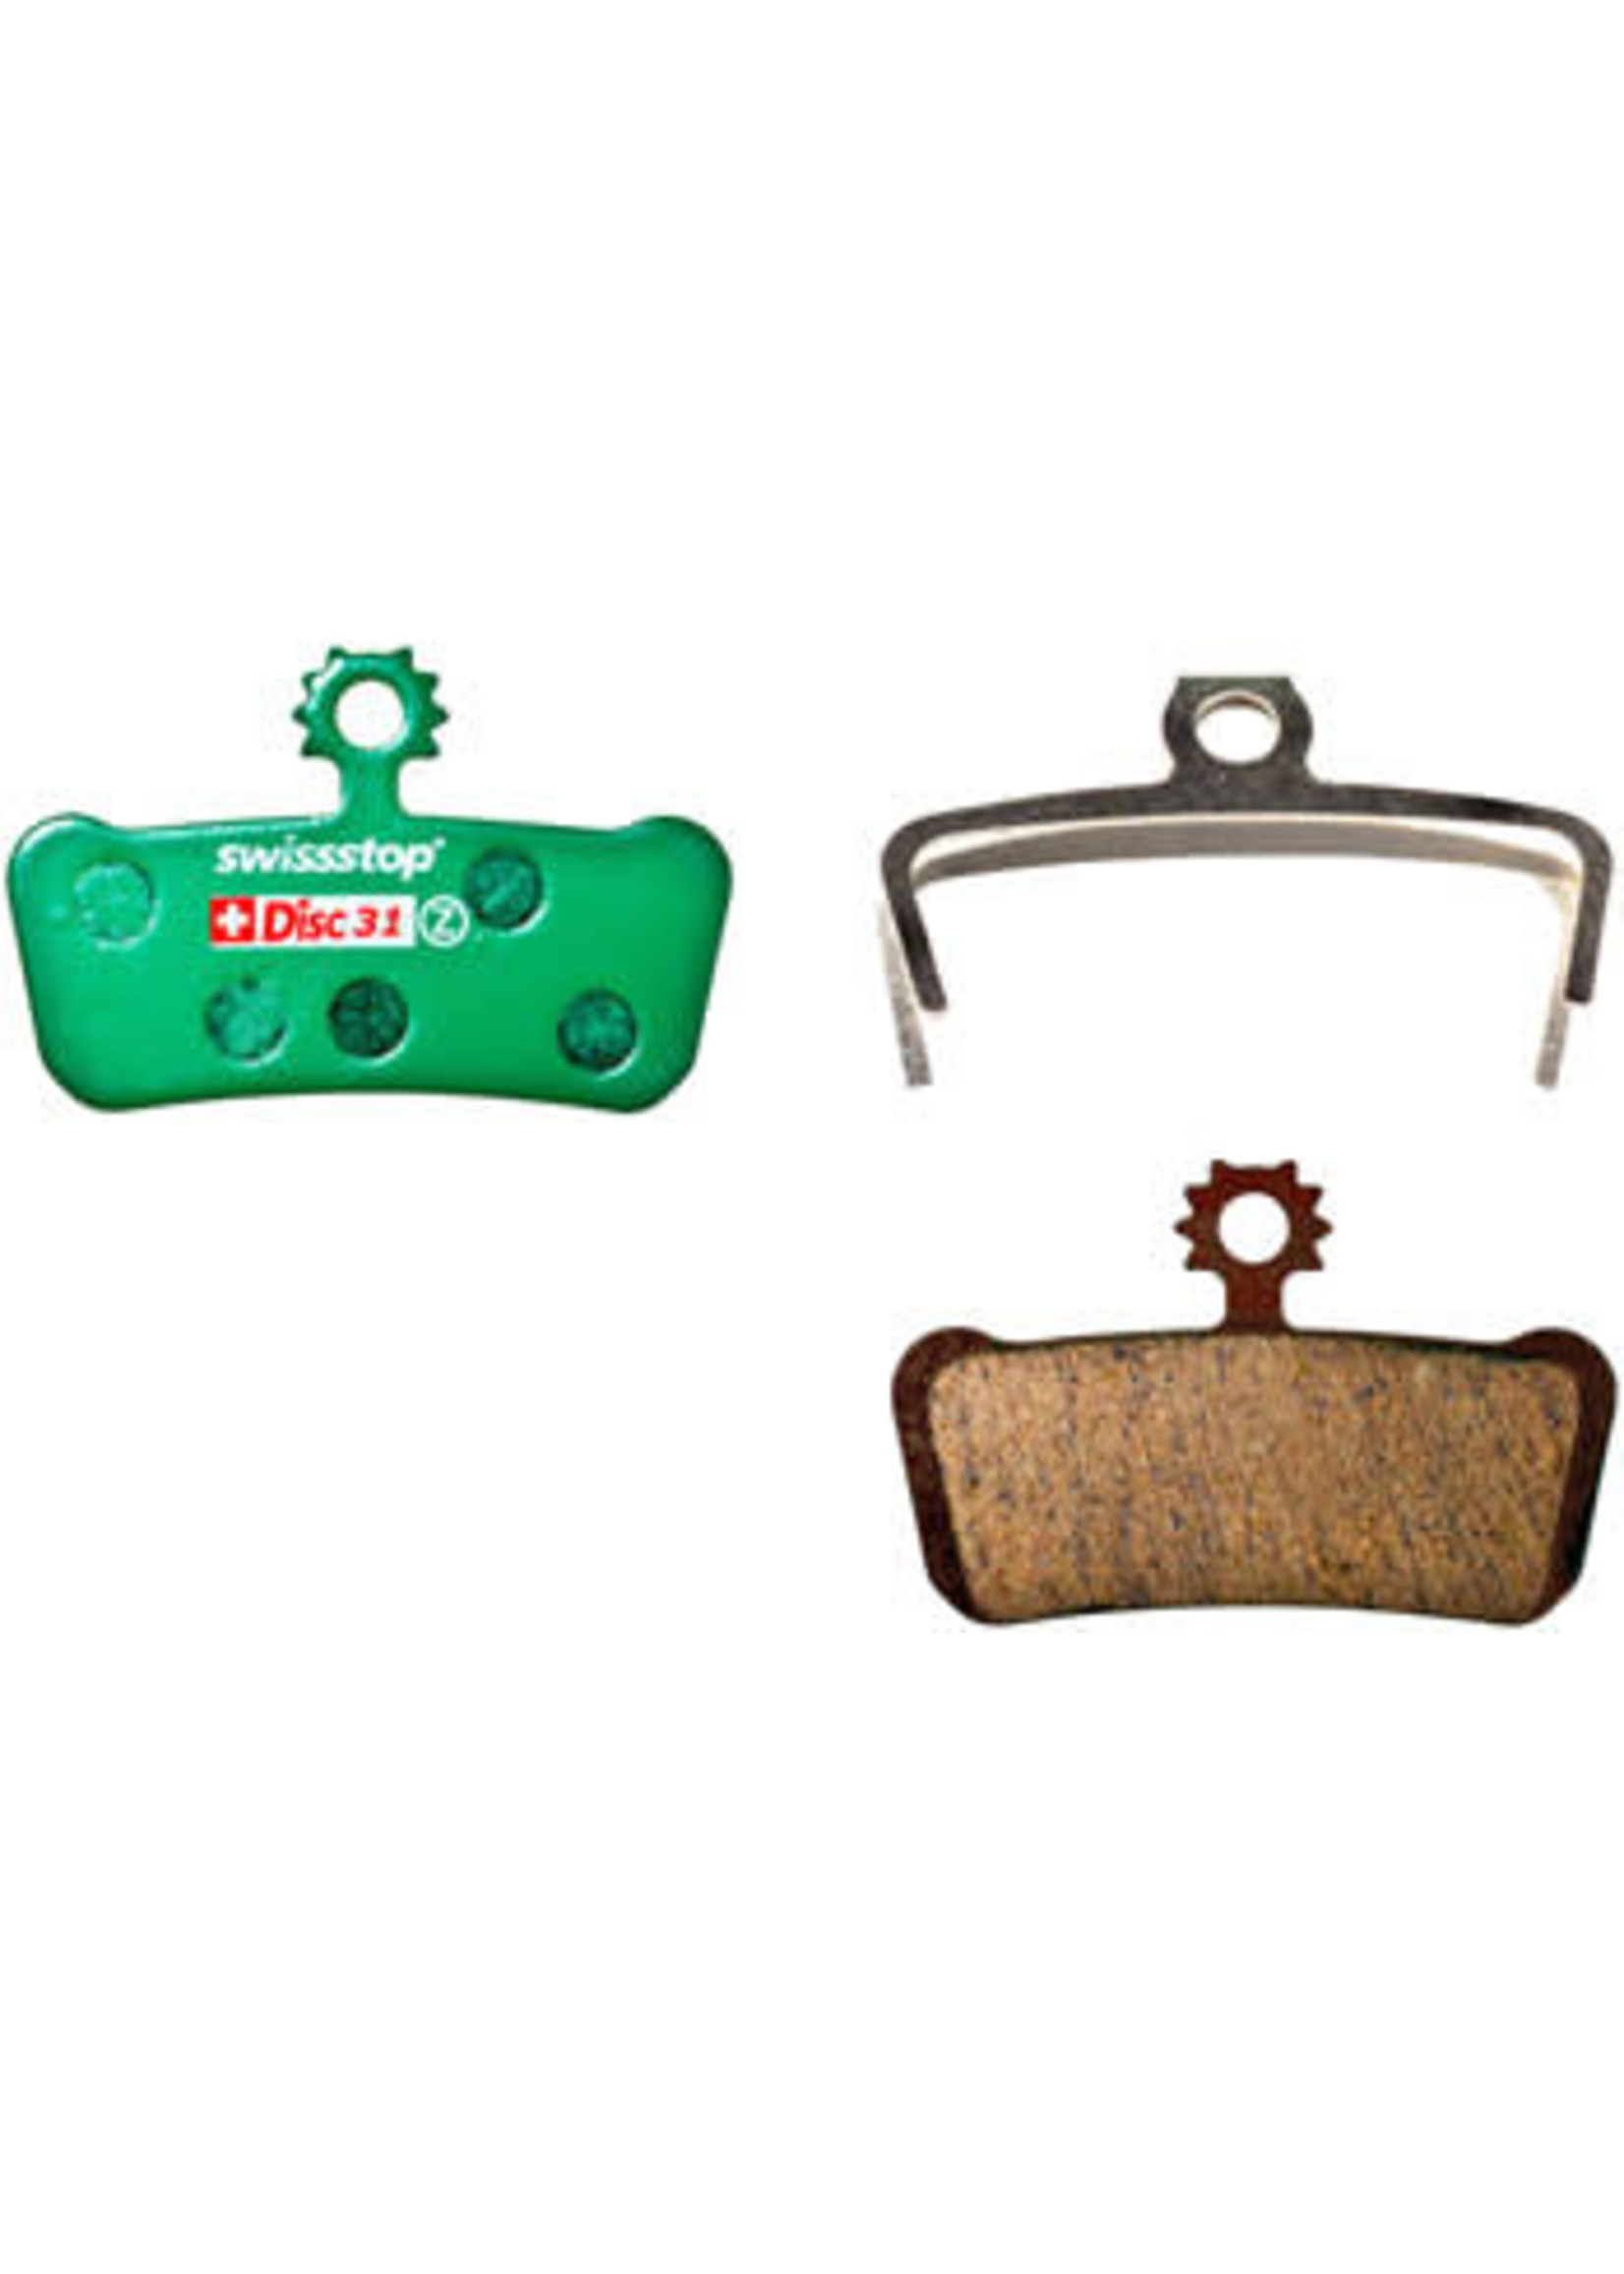 SwissStop SwissStop Disc C Disc Brake Pad Set - Disc 31, for SRAM Guide and Elixir Trail